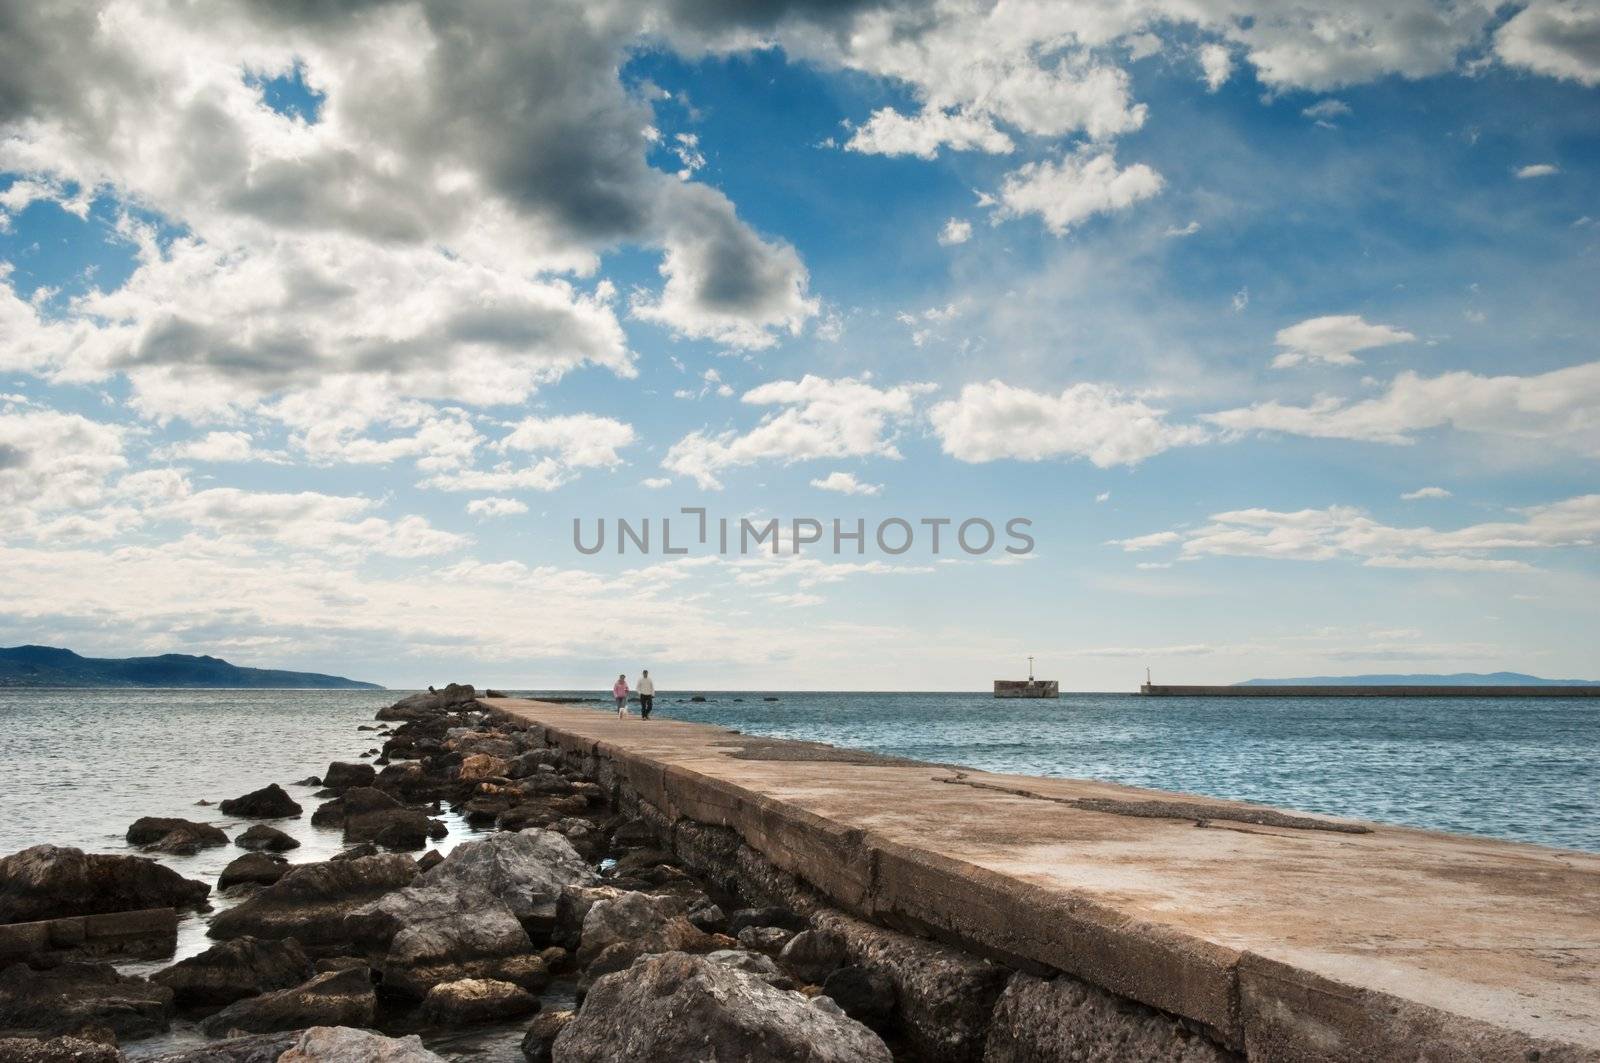 A couple in the distance strolling along the pier in Kalamata, southern Greece, under a spectacular cloudscape